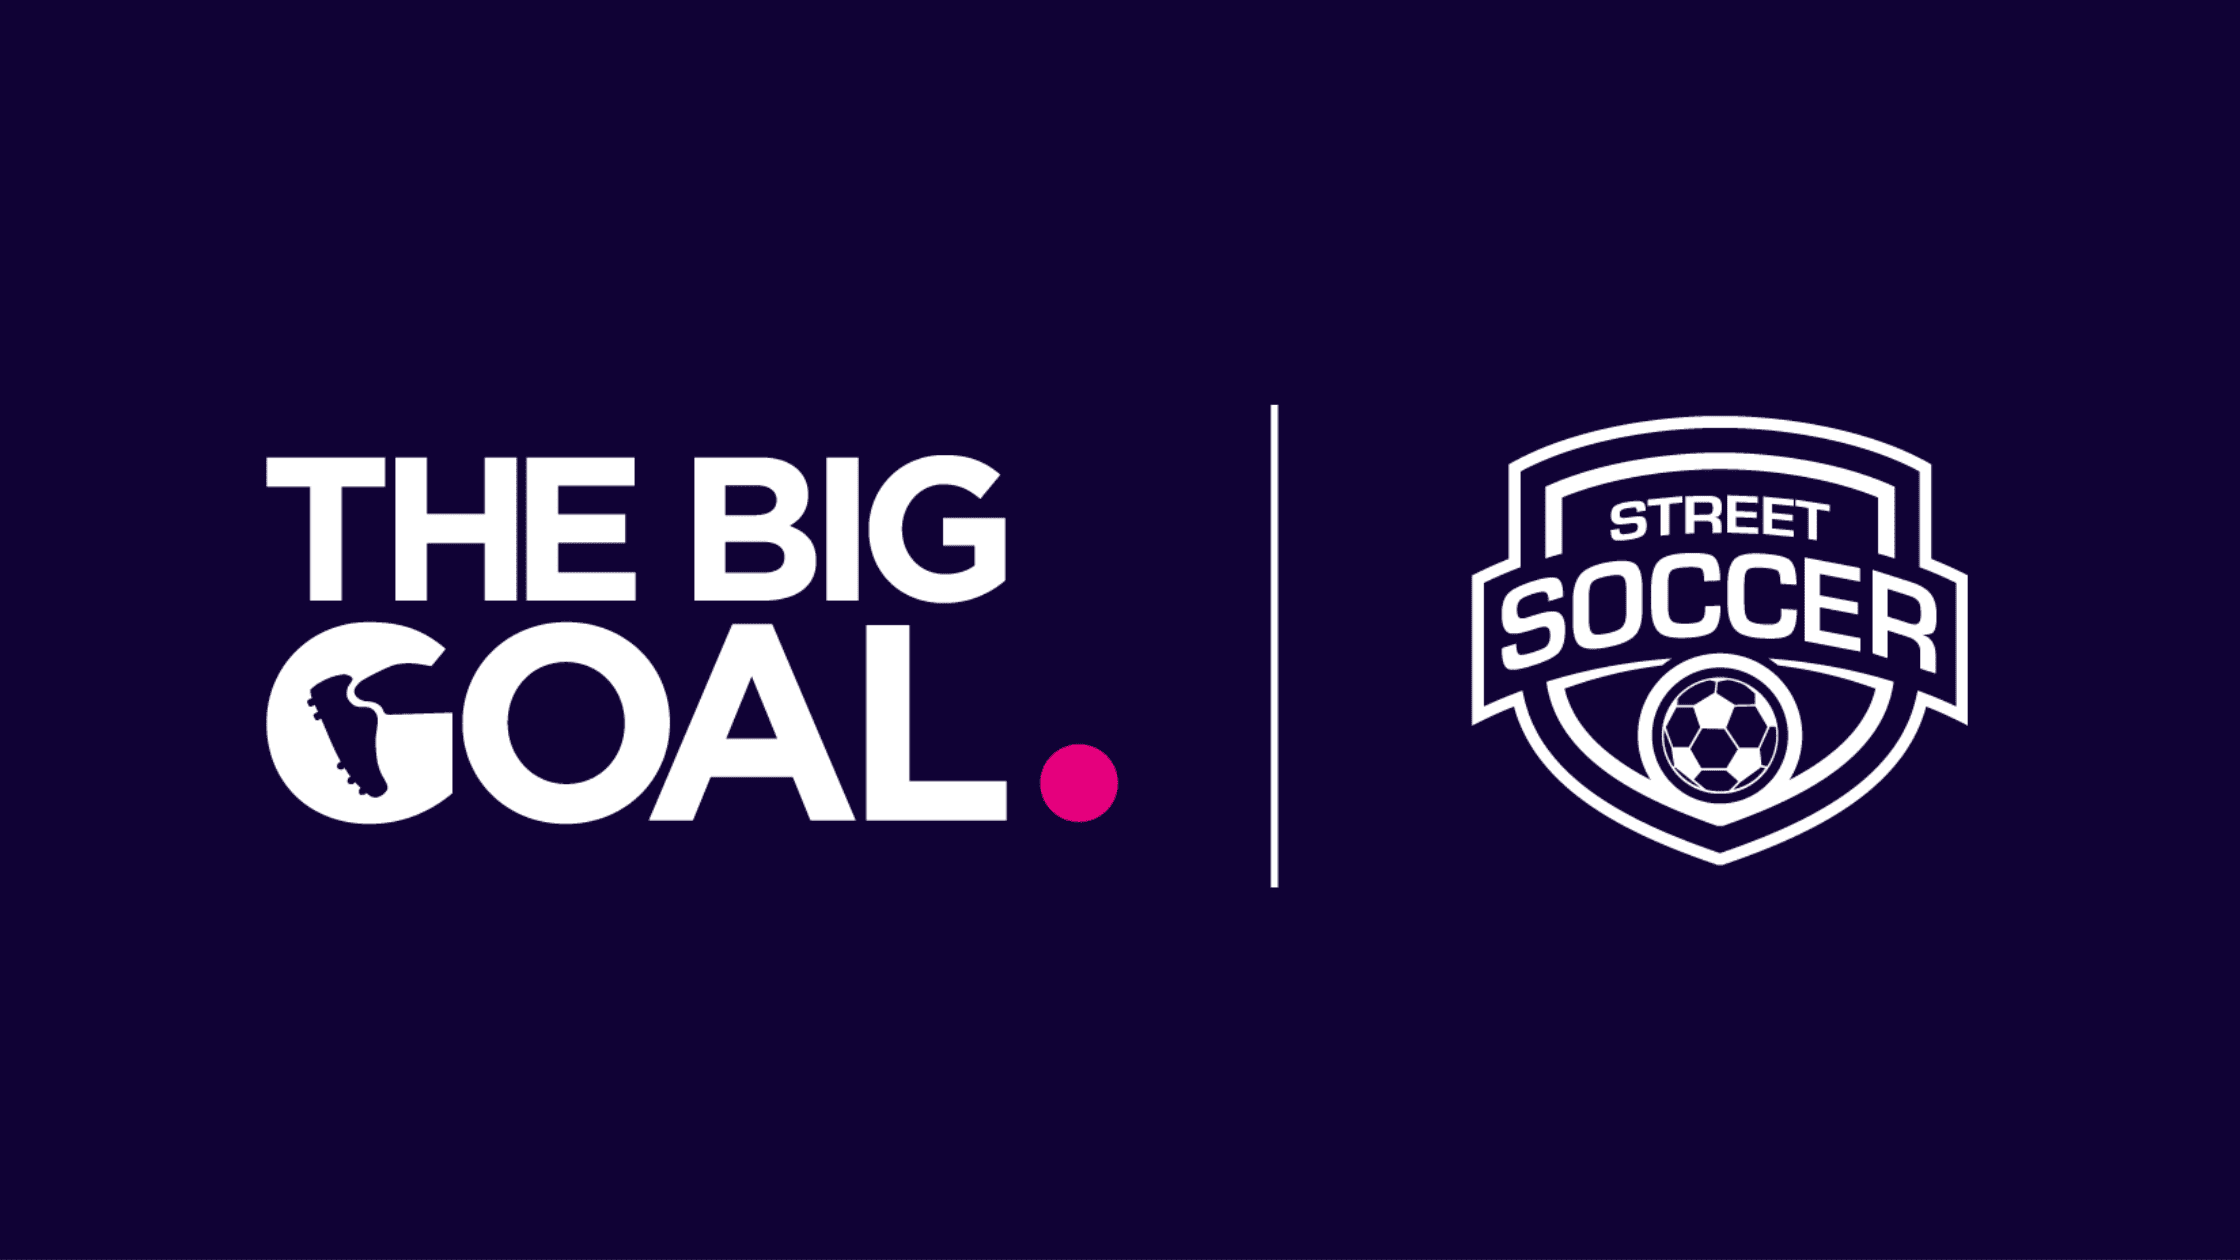 The Big Goal and Street Soccer Foundation logos